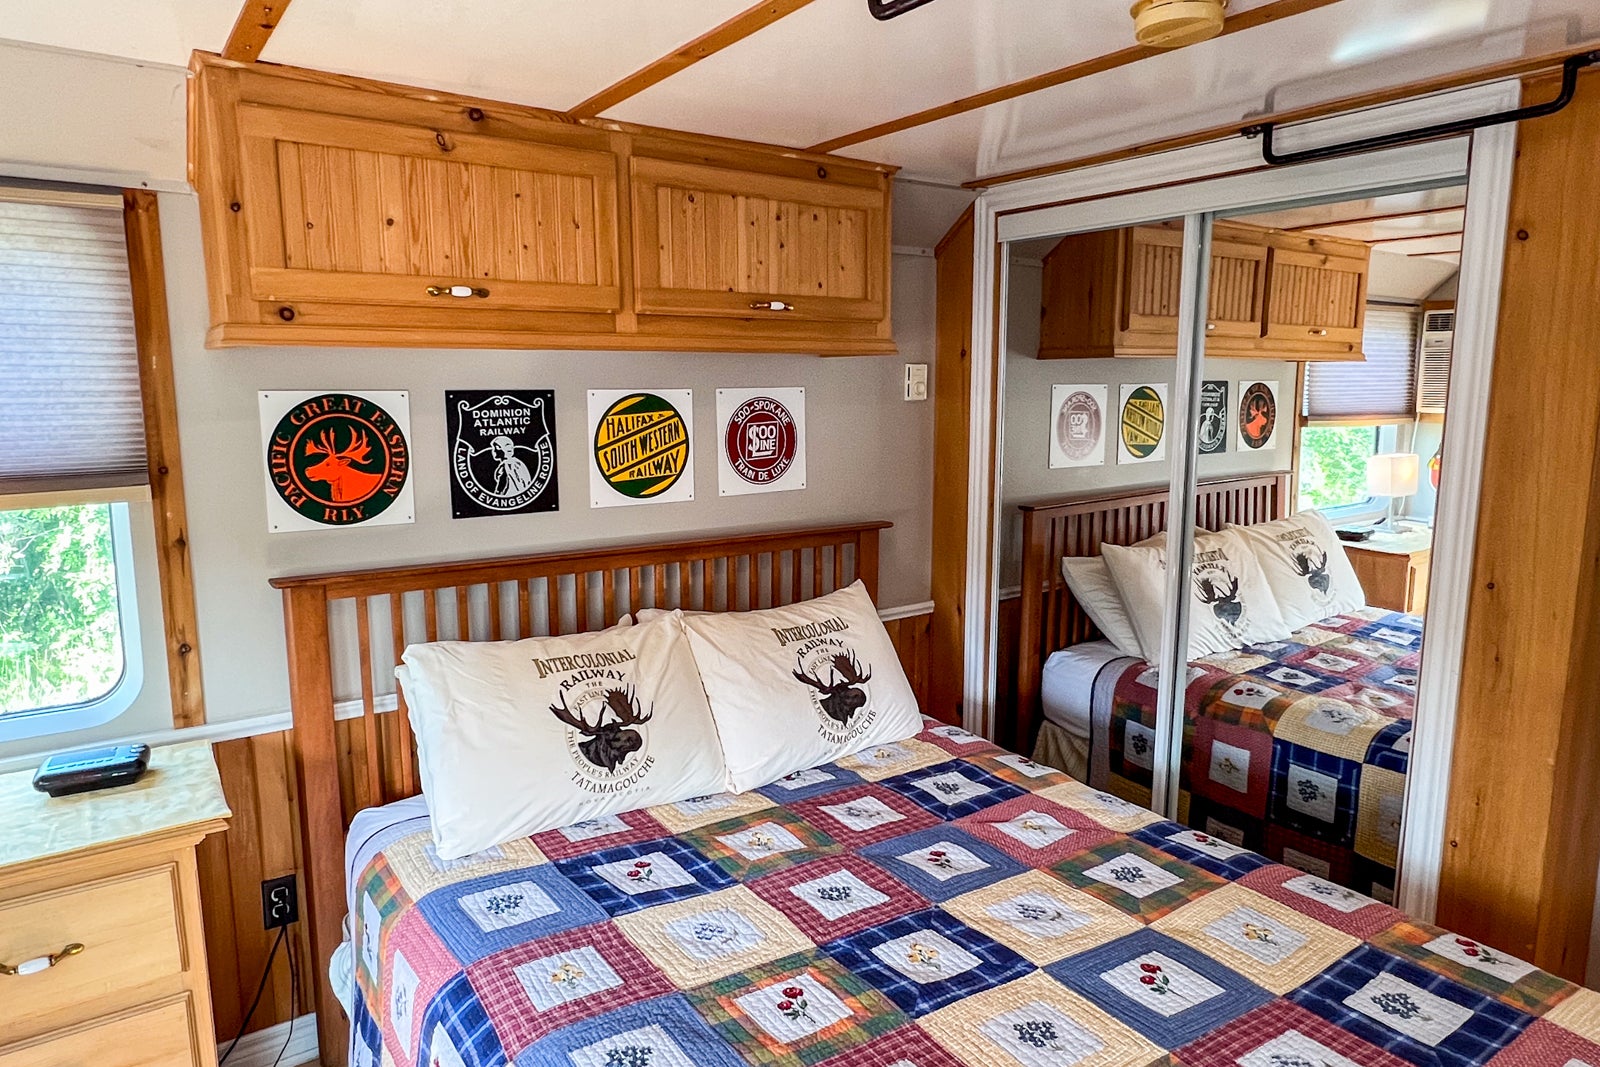 A view of the bedroom of Caboose #8 at the Train Station Inn in Tatamagouche, Nova Scotia